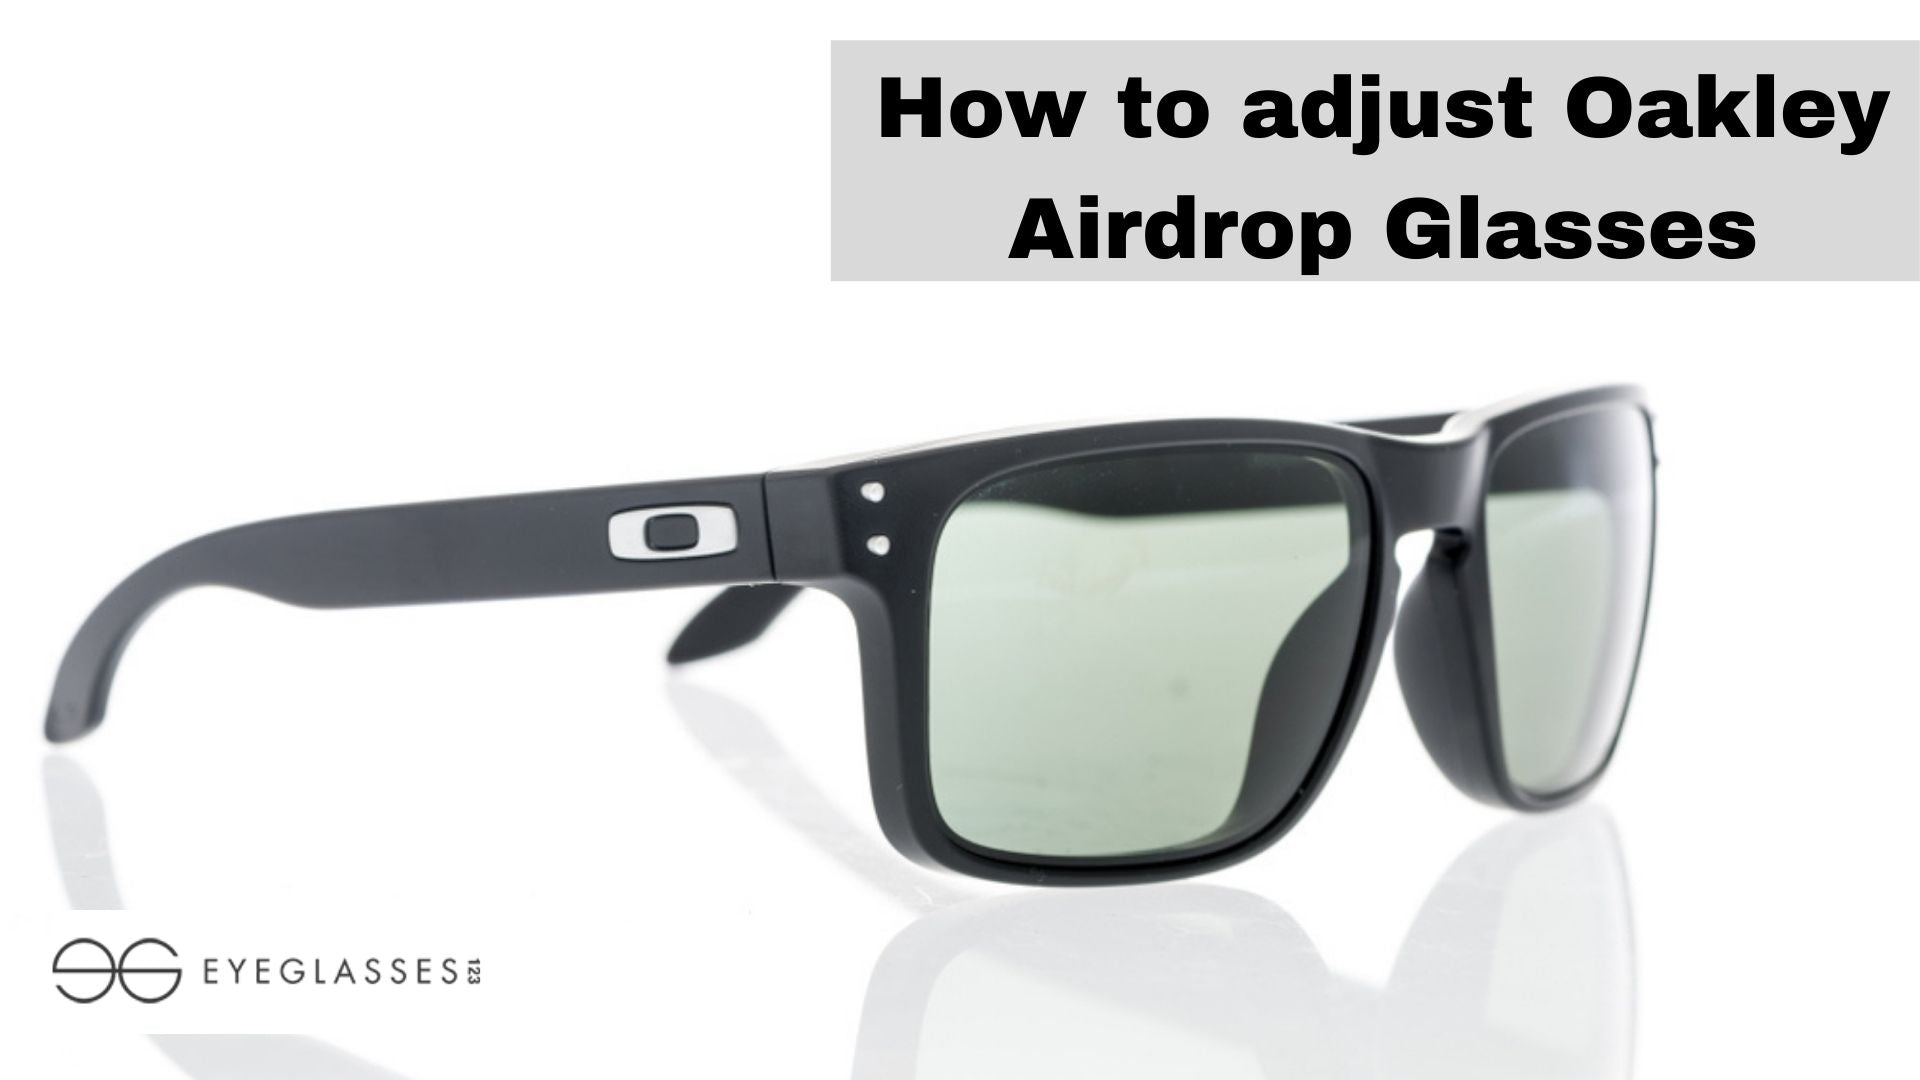 How to adjust Oakley Airdrop Glasses